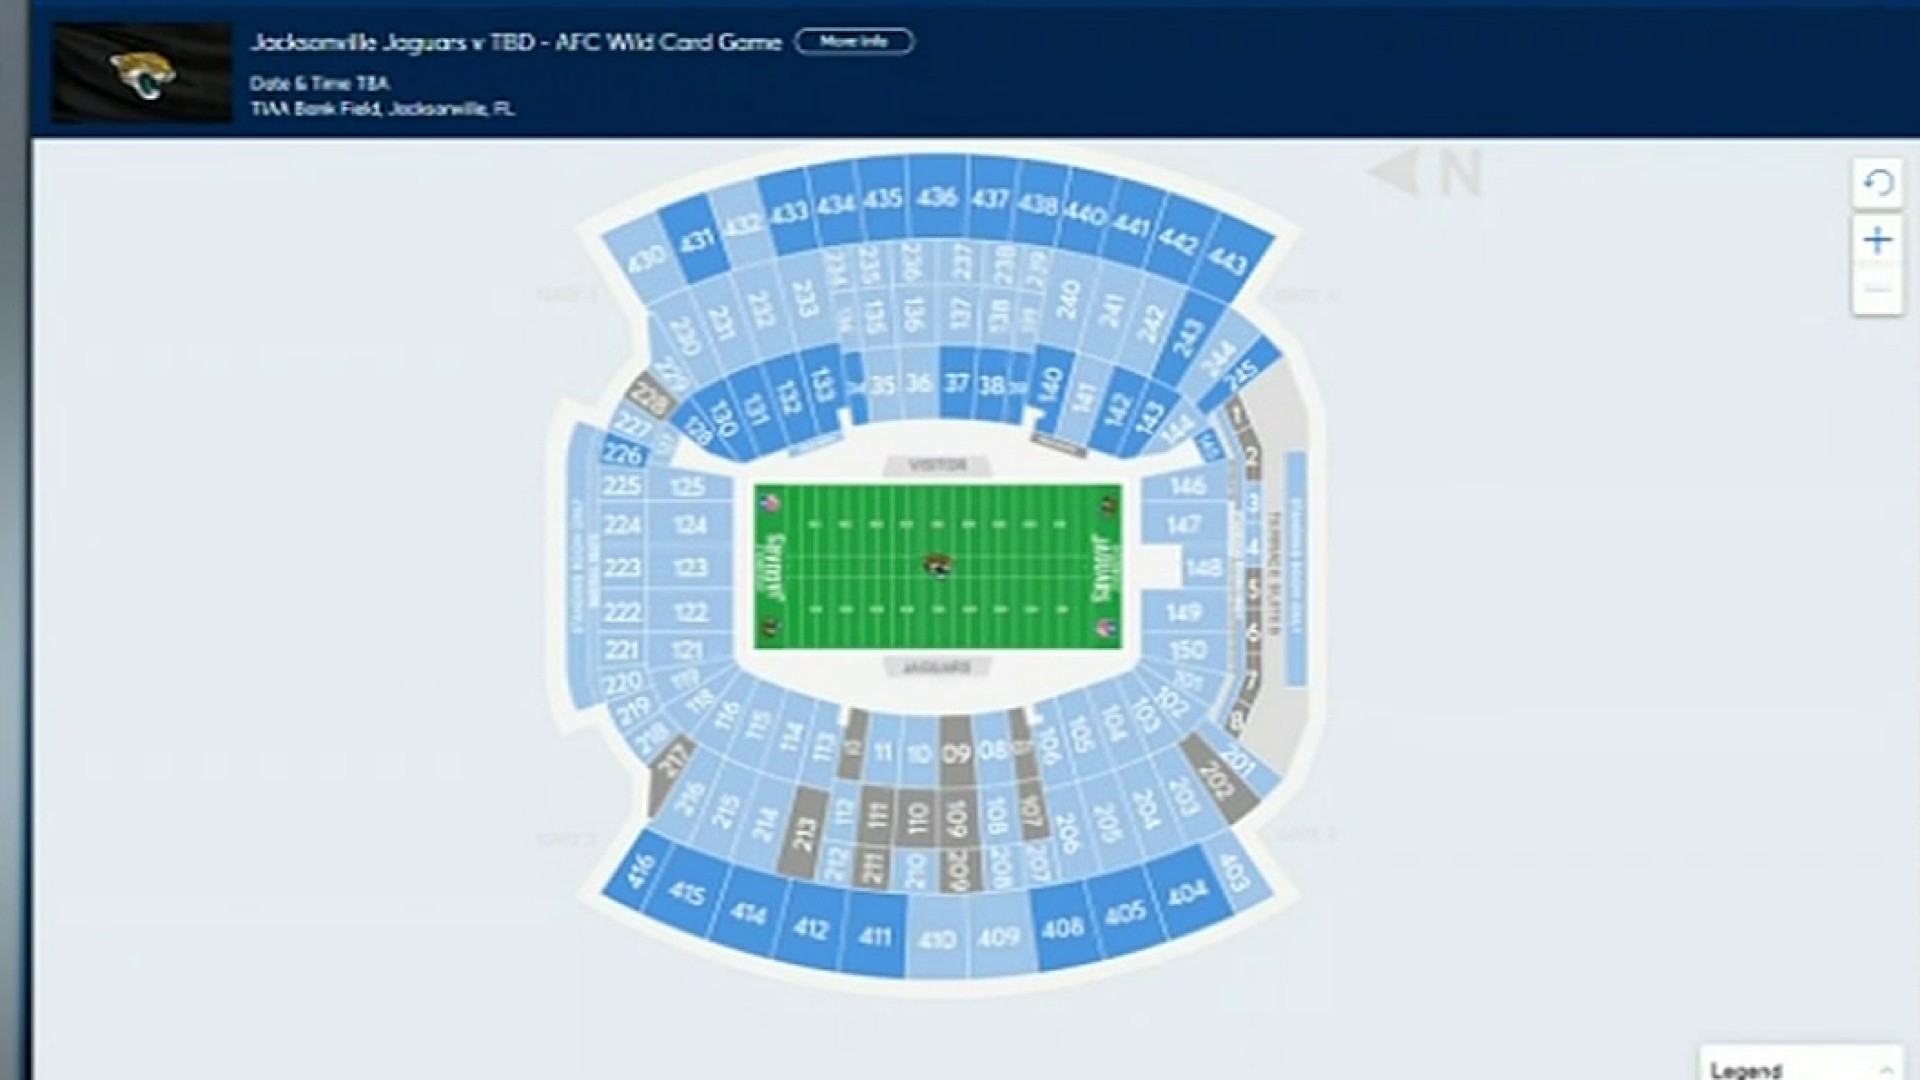 chargers season ticket prices 2022